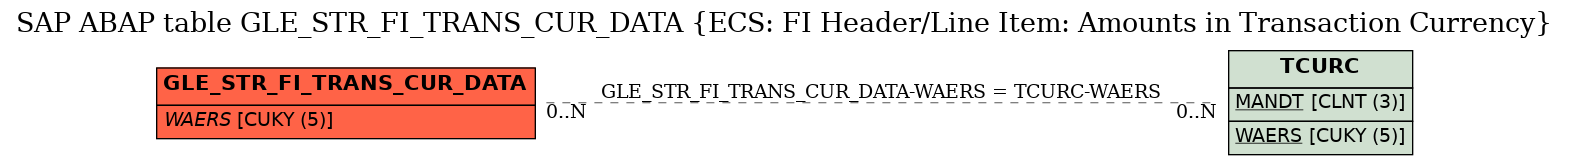 E-R Diagram for table GLE_STR_FI_TRANS_CUR_DATA (ECS: FI Header/Line Item: Amounts in Transaction Currency)